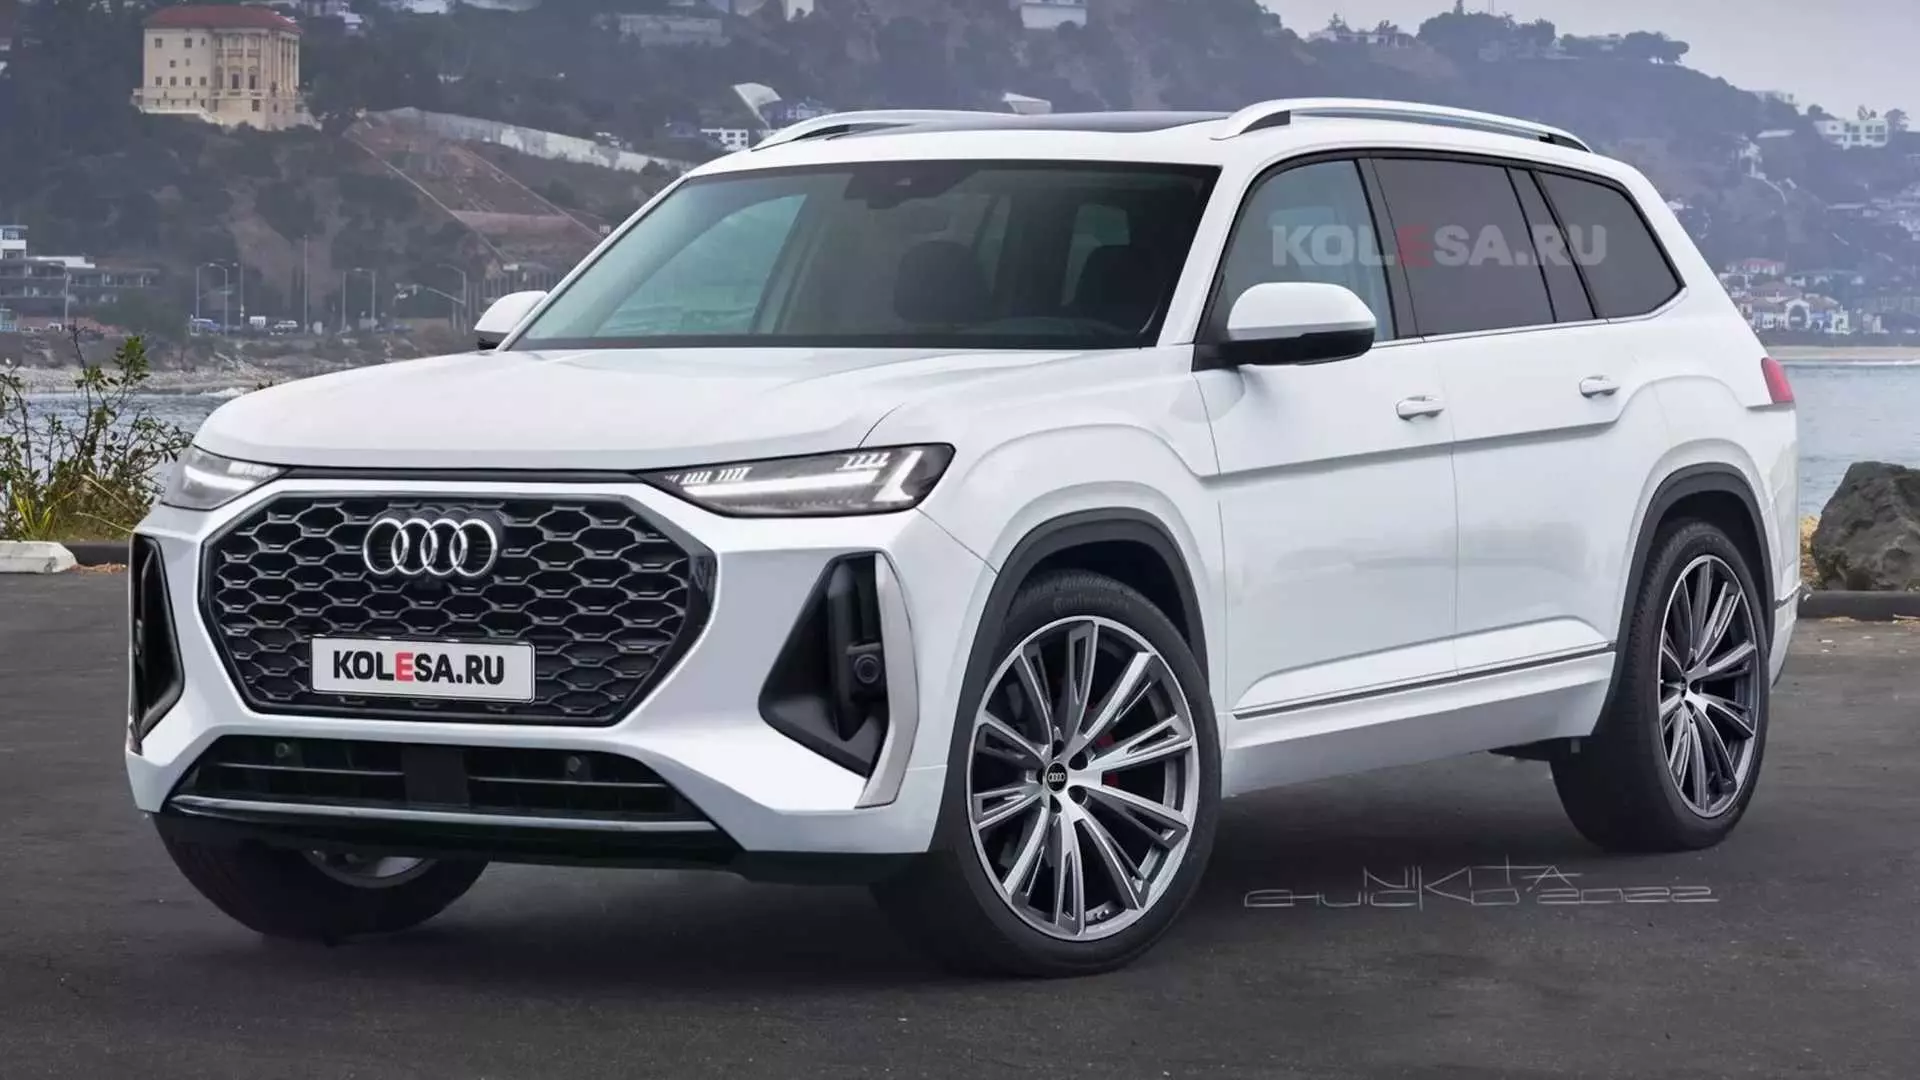 This Is How the Audi Q9 Could Look Like